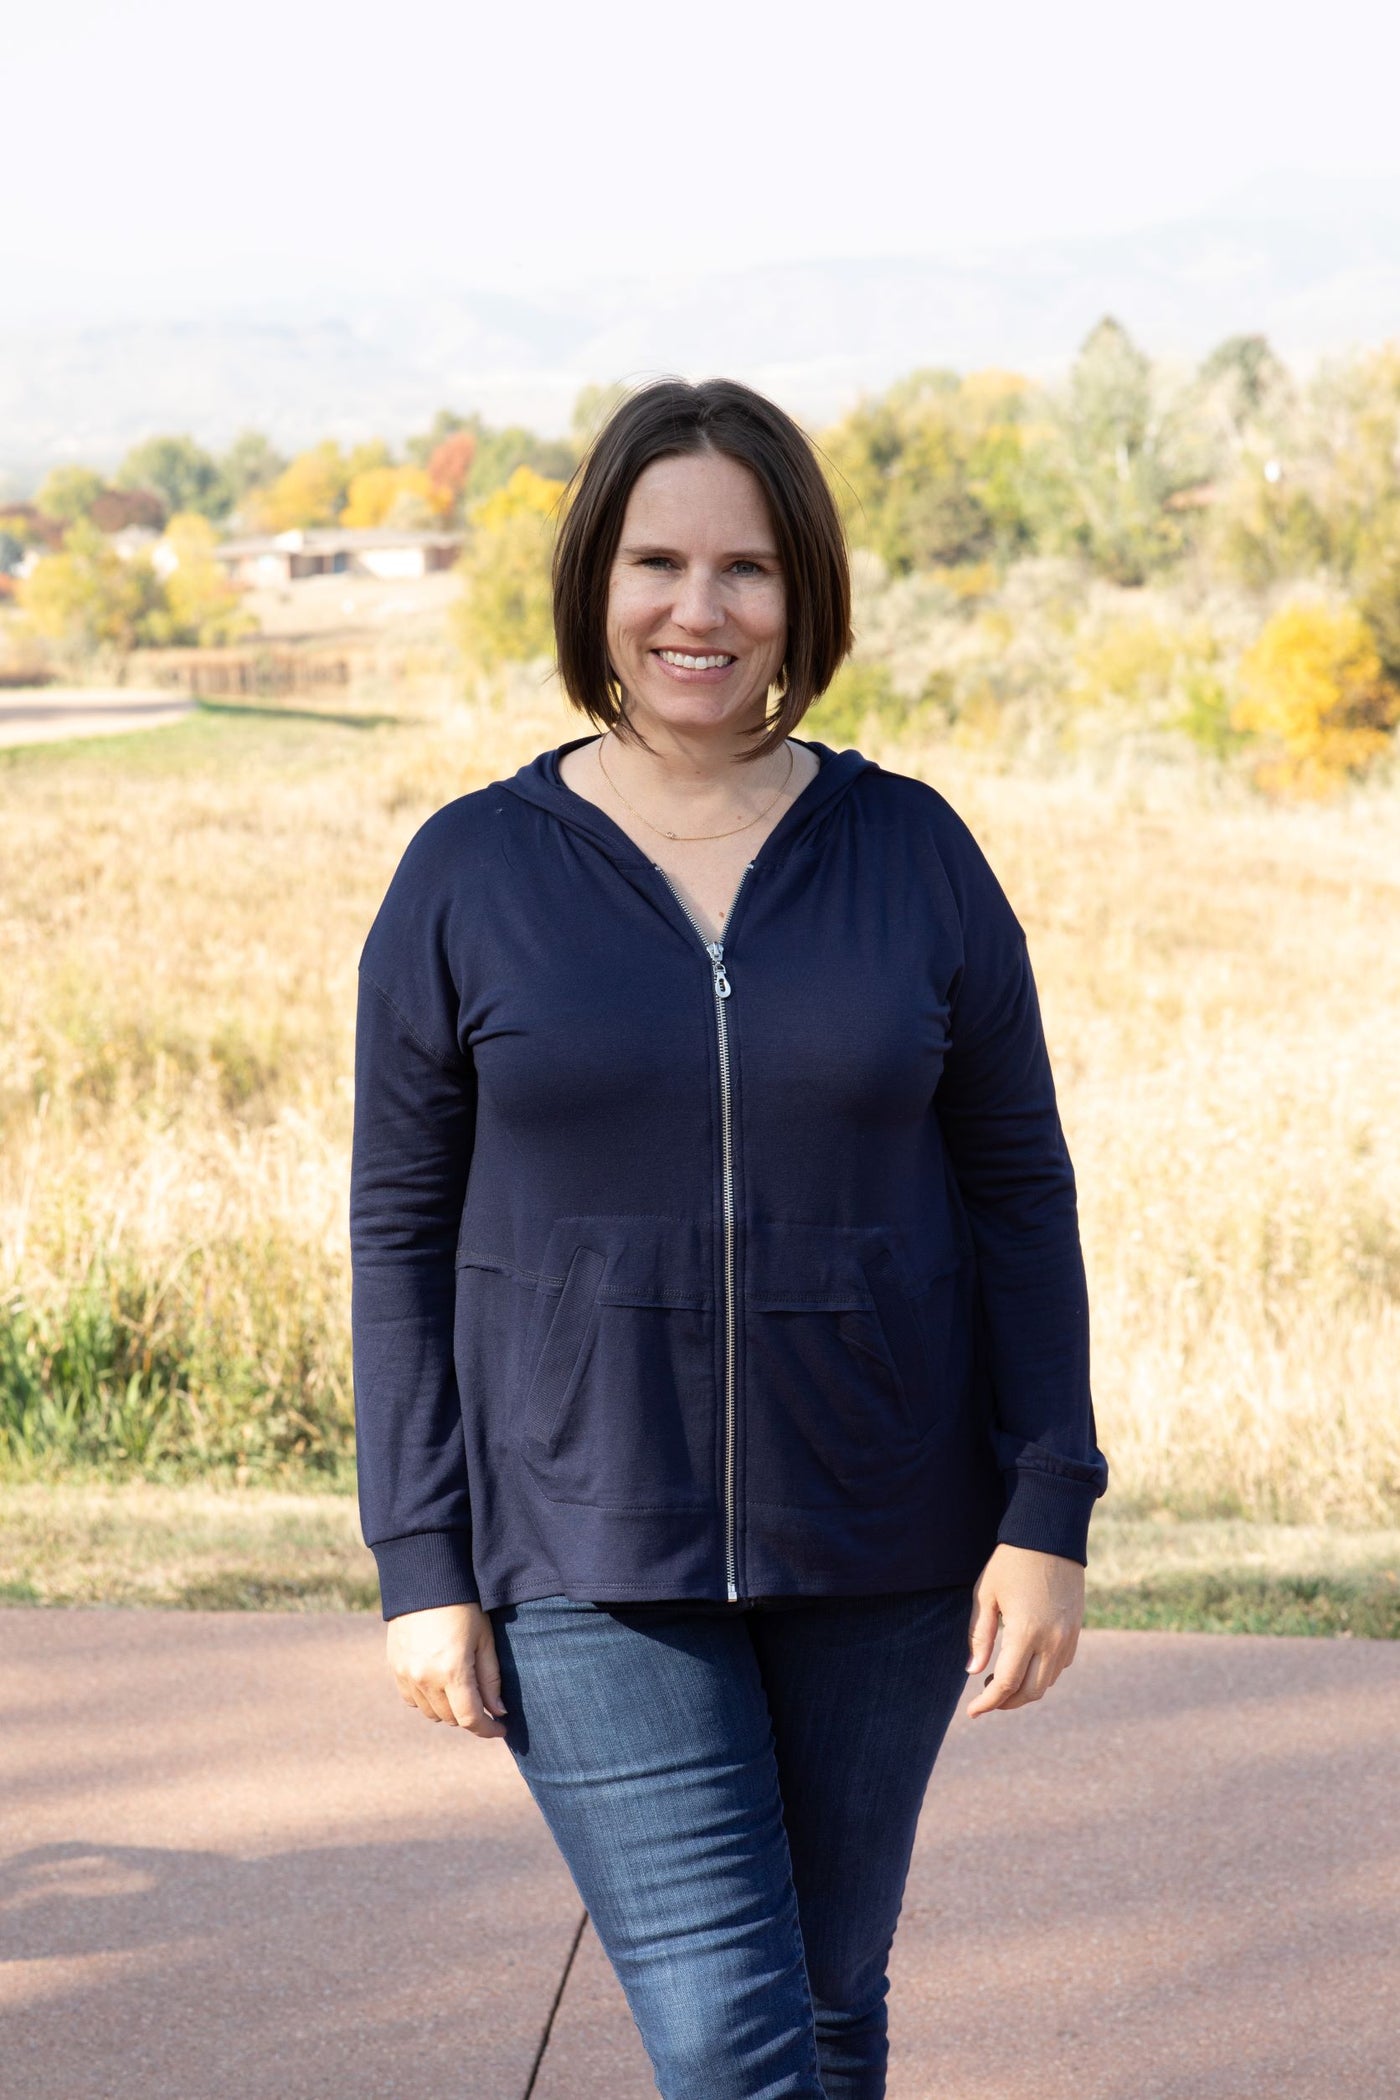 Emily Zip Front Jacket-Outerwear-Cable & Gauge-Stella Violet Boutique in Arvada, Colorado